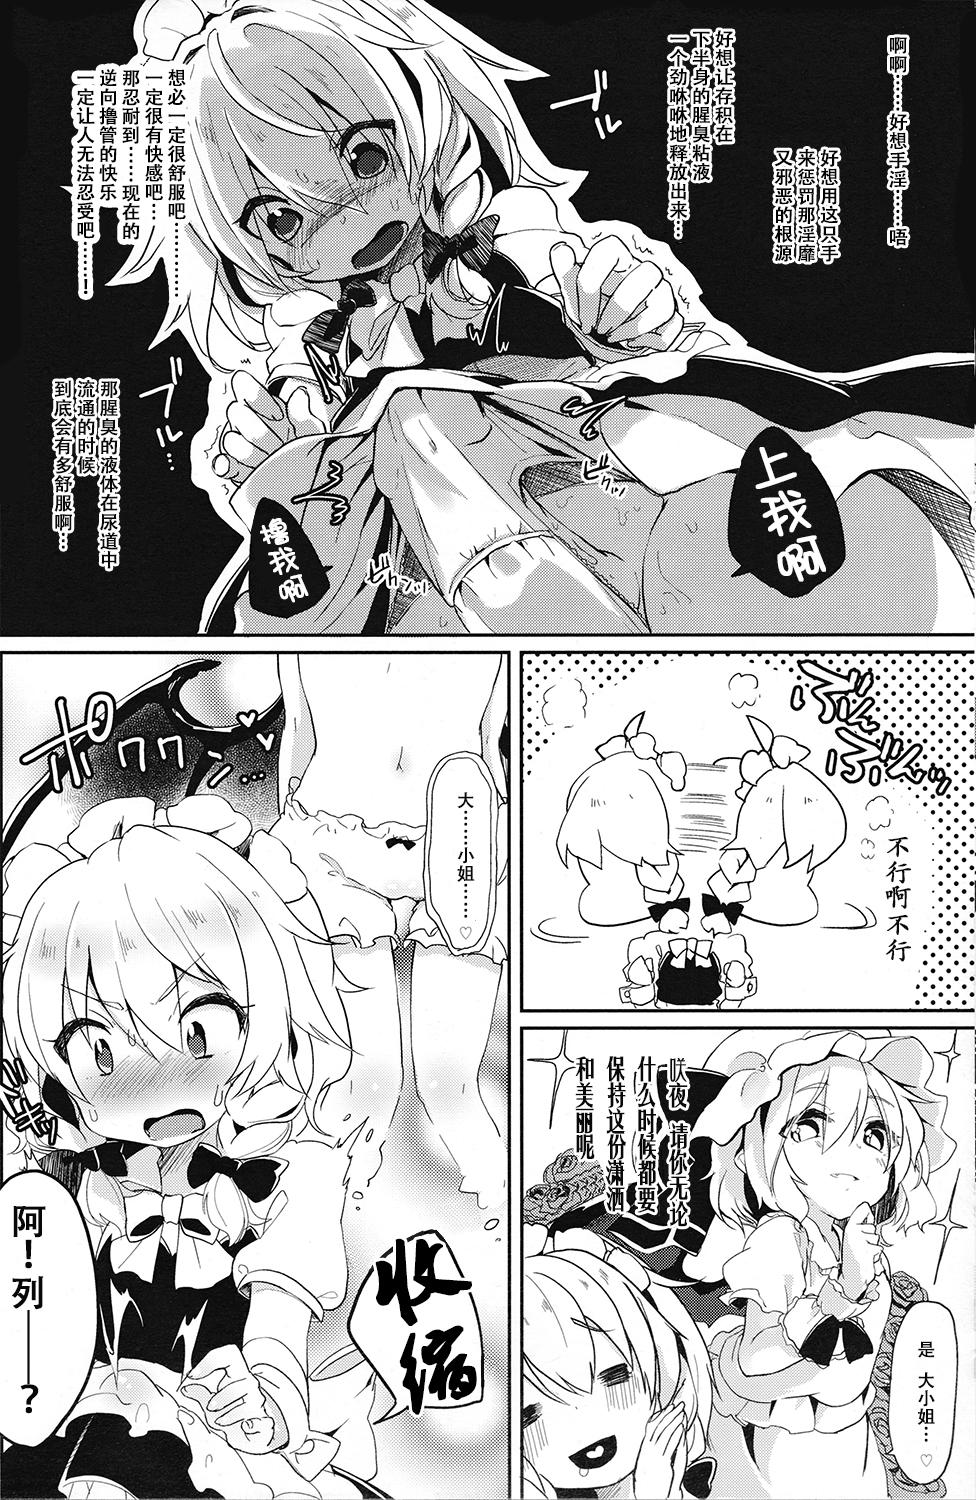 Boobs Reverse Enemy - Touhou project Footfetish - Page 7